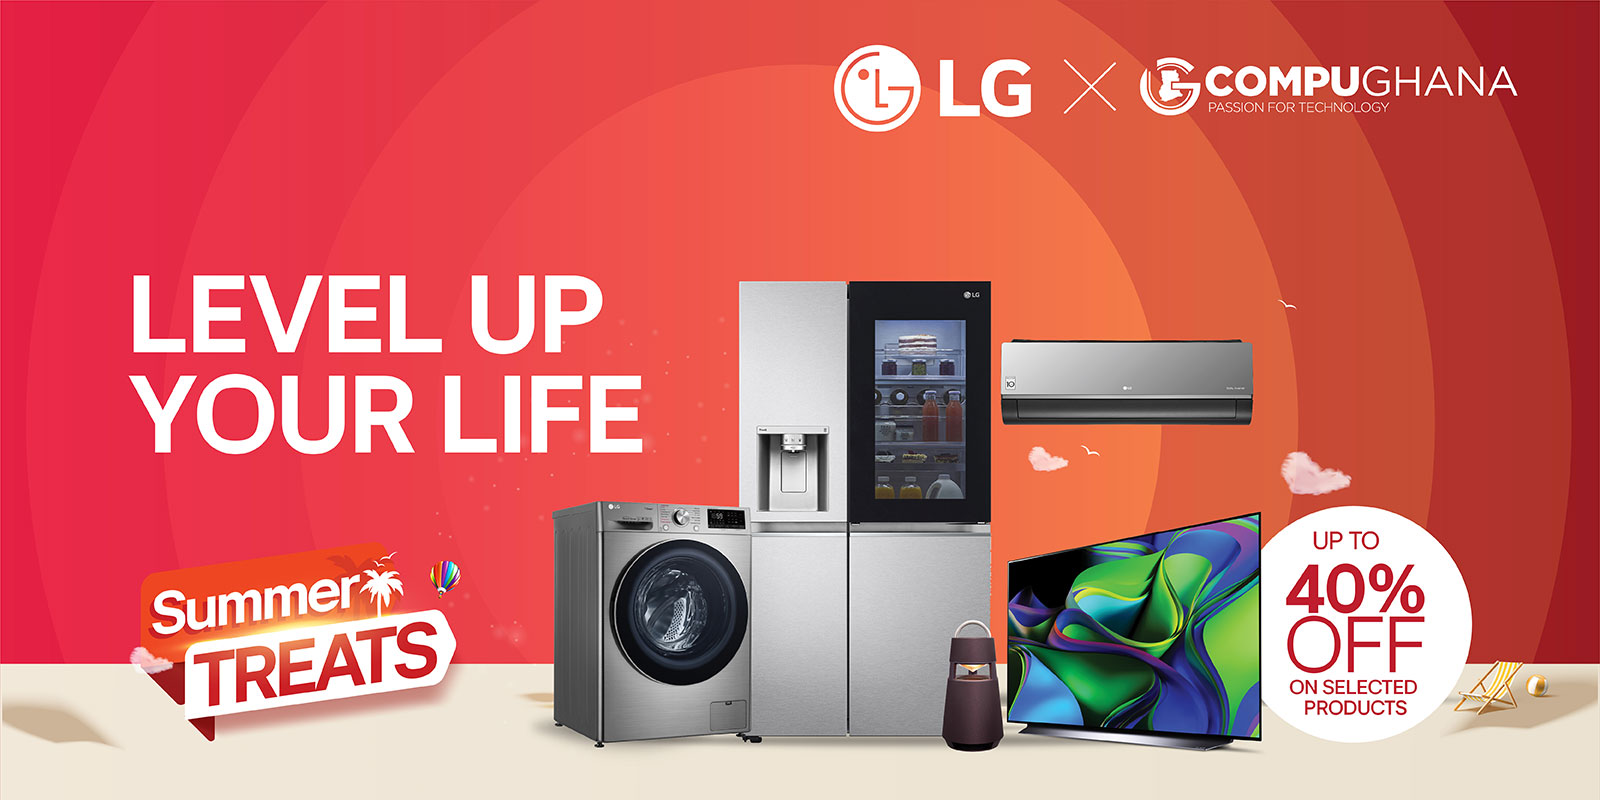 LG Education Products Promotion